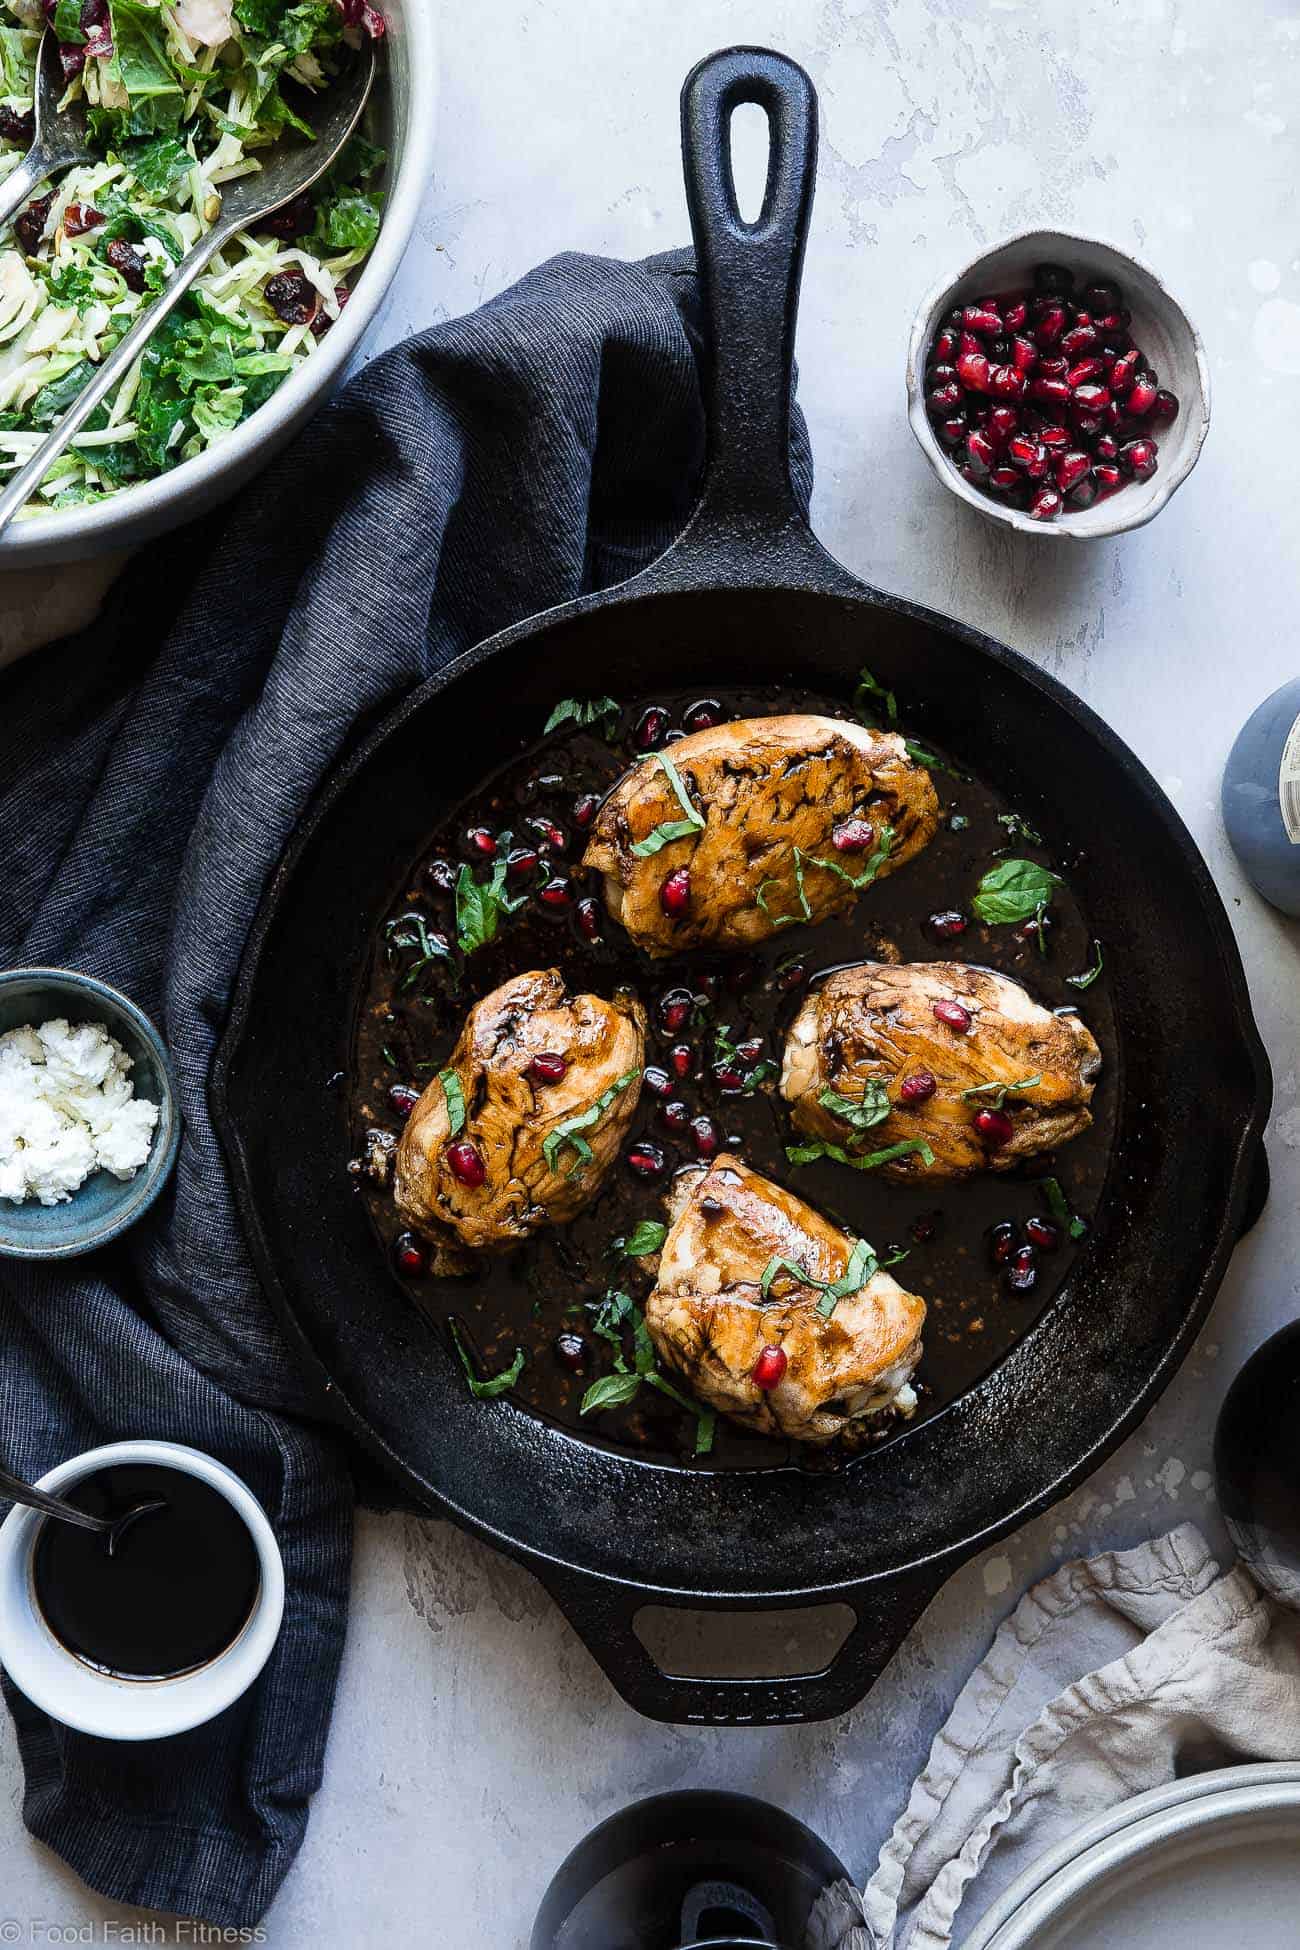 Baked Balsamic Goat Cheese Stuffed Pomegranate Chicken - This easy balsamic chicken recipe is aÂ  healthy and gluten free dinner, loaded with superfoods! Both picky husbands and kids love this dinner and it feels like a fancy restaurant but is quick and easy enough for weeknights! | Foodfaithfitness.com | @FoodFaithFit